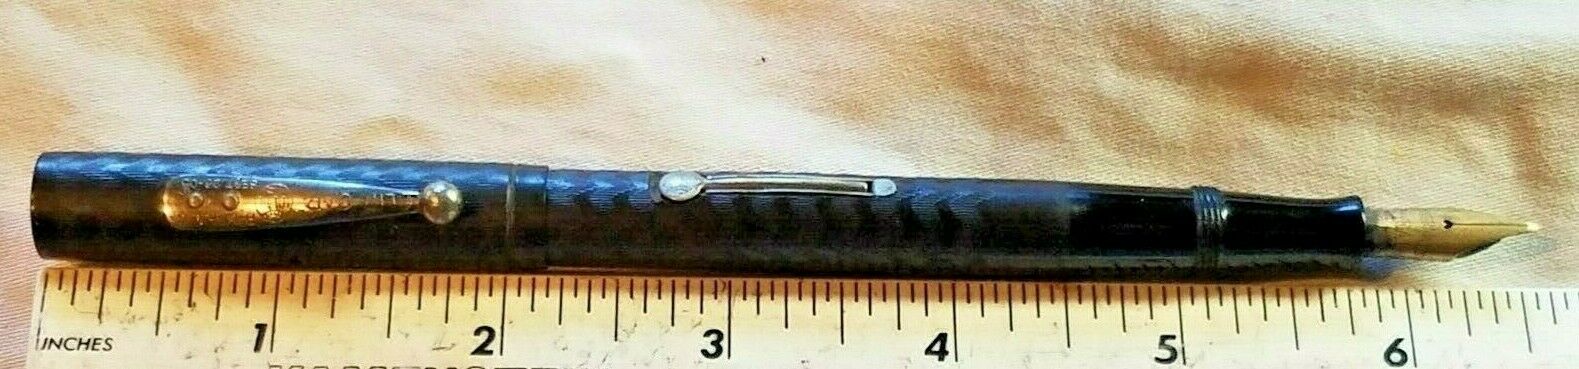 Waterman "14 Psf" Ideal Clip Cap Fountain Pen Very Hard To Find In Vg Shape